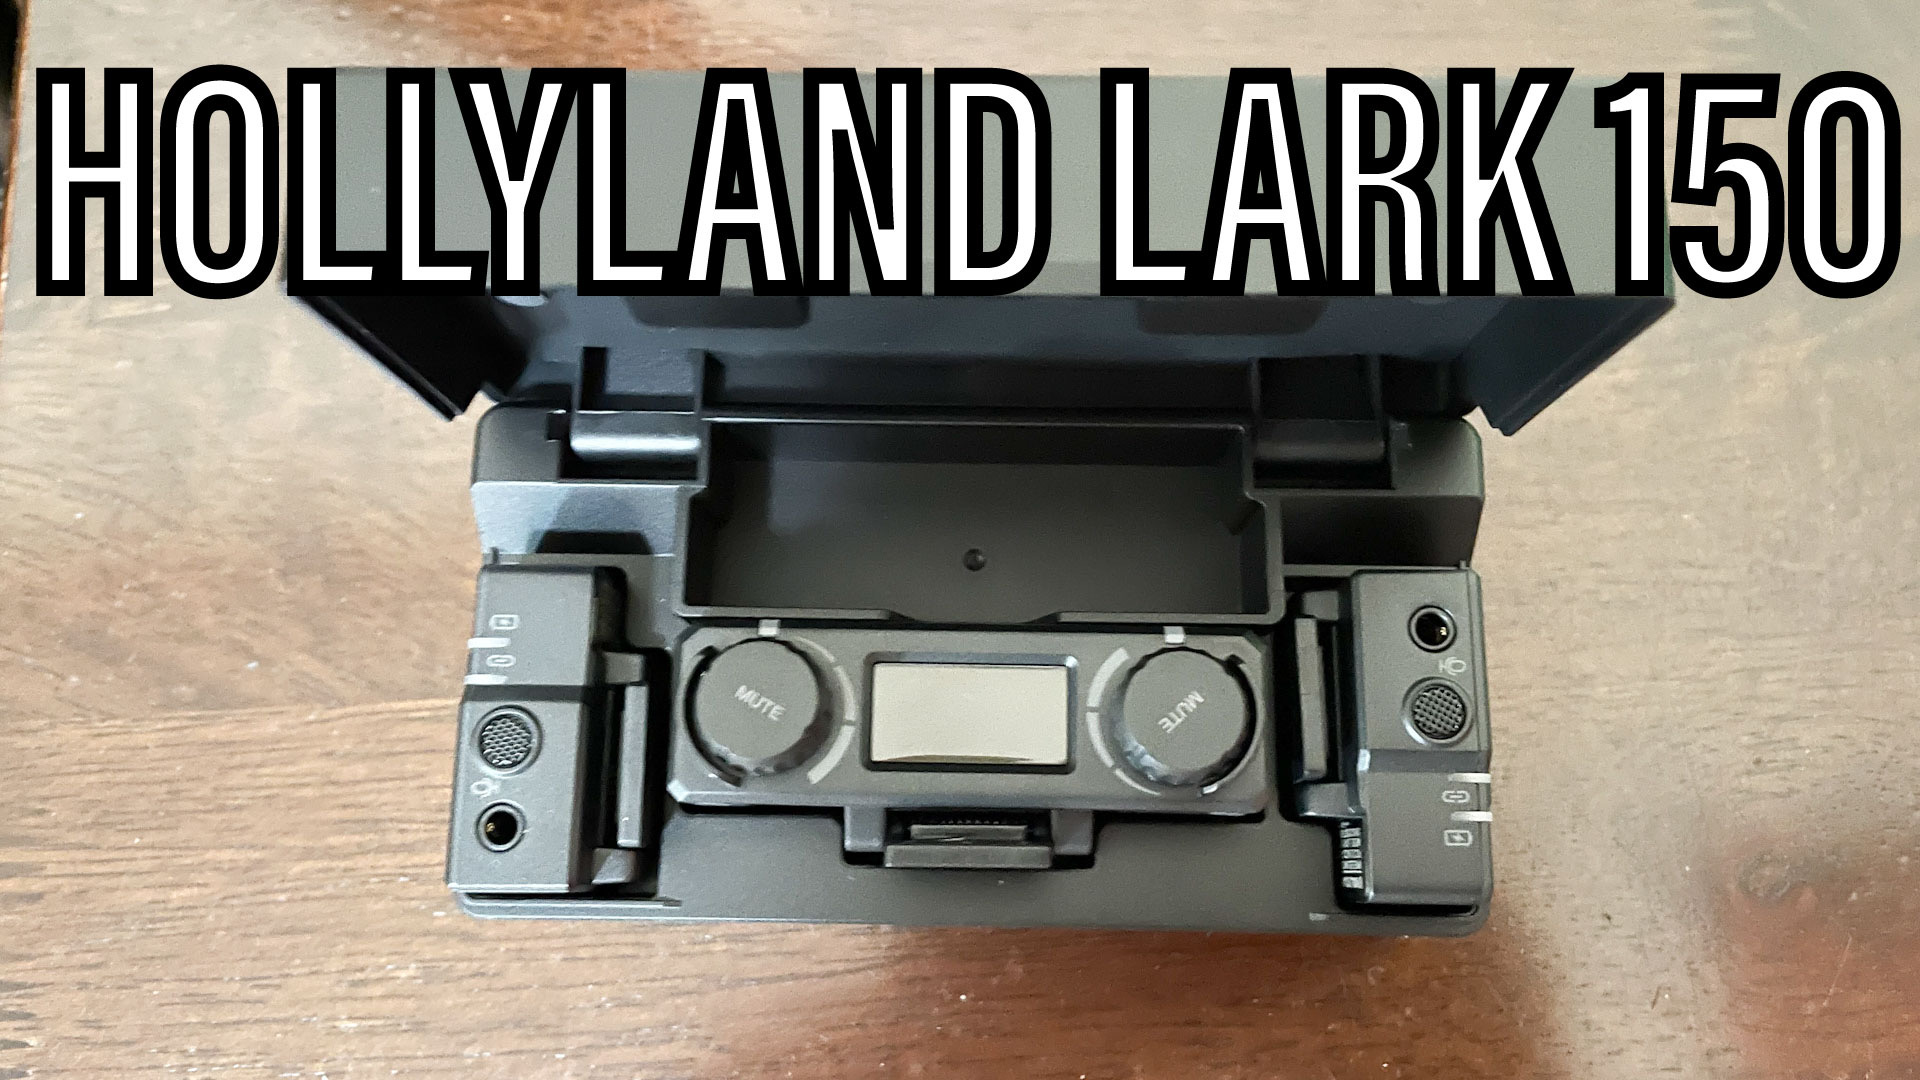 Hollyland Lark 150 Wireless Microphone System Unboxing Review